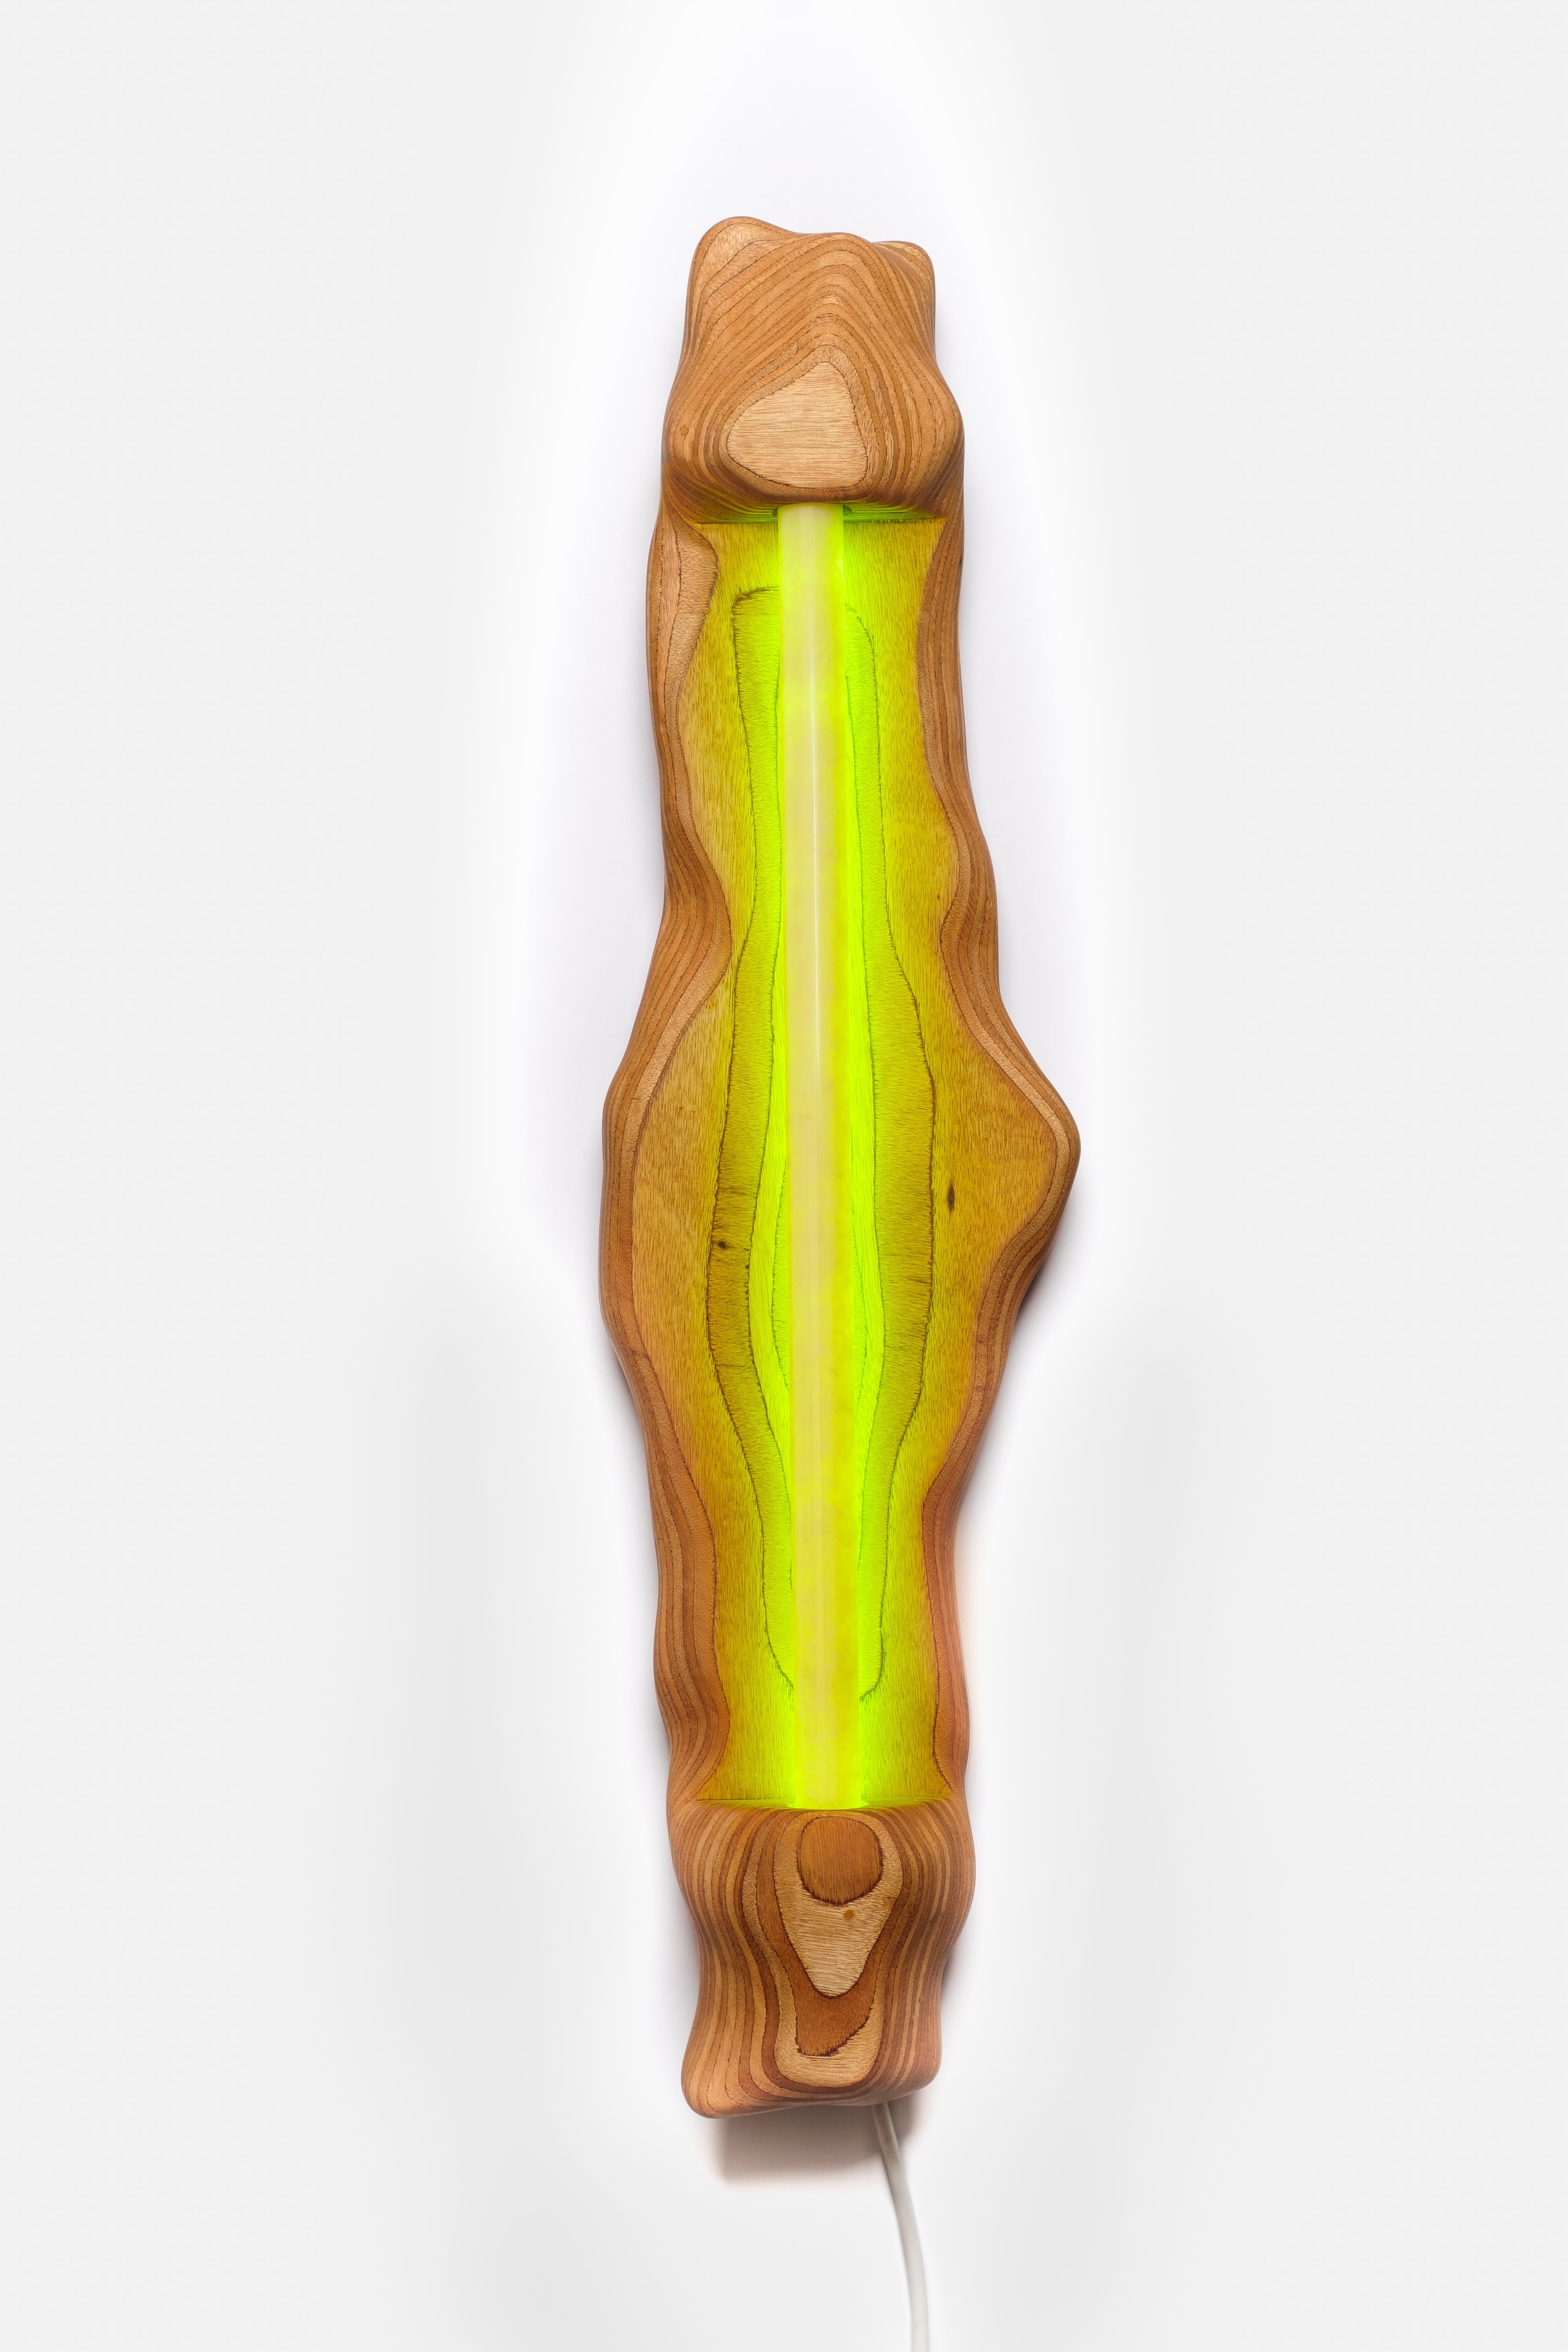 Exlusive wall light made of Okoume wood with a green neon light. Handcrafted by Studio Gert Wessels. Handcrafted in an organic shape and made in his studio in the Netherlands. 

In his daily practice he investigates the relationship between form